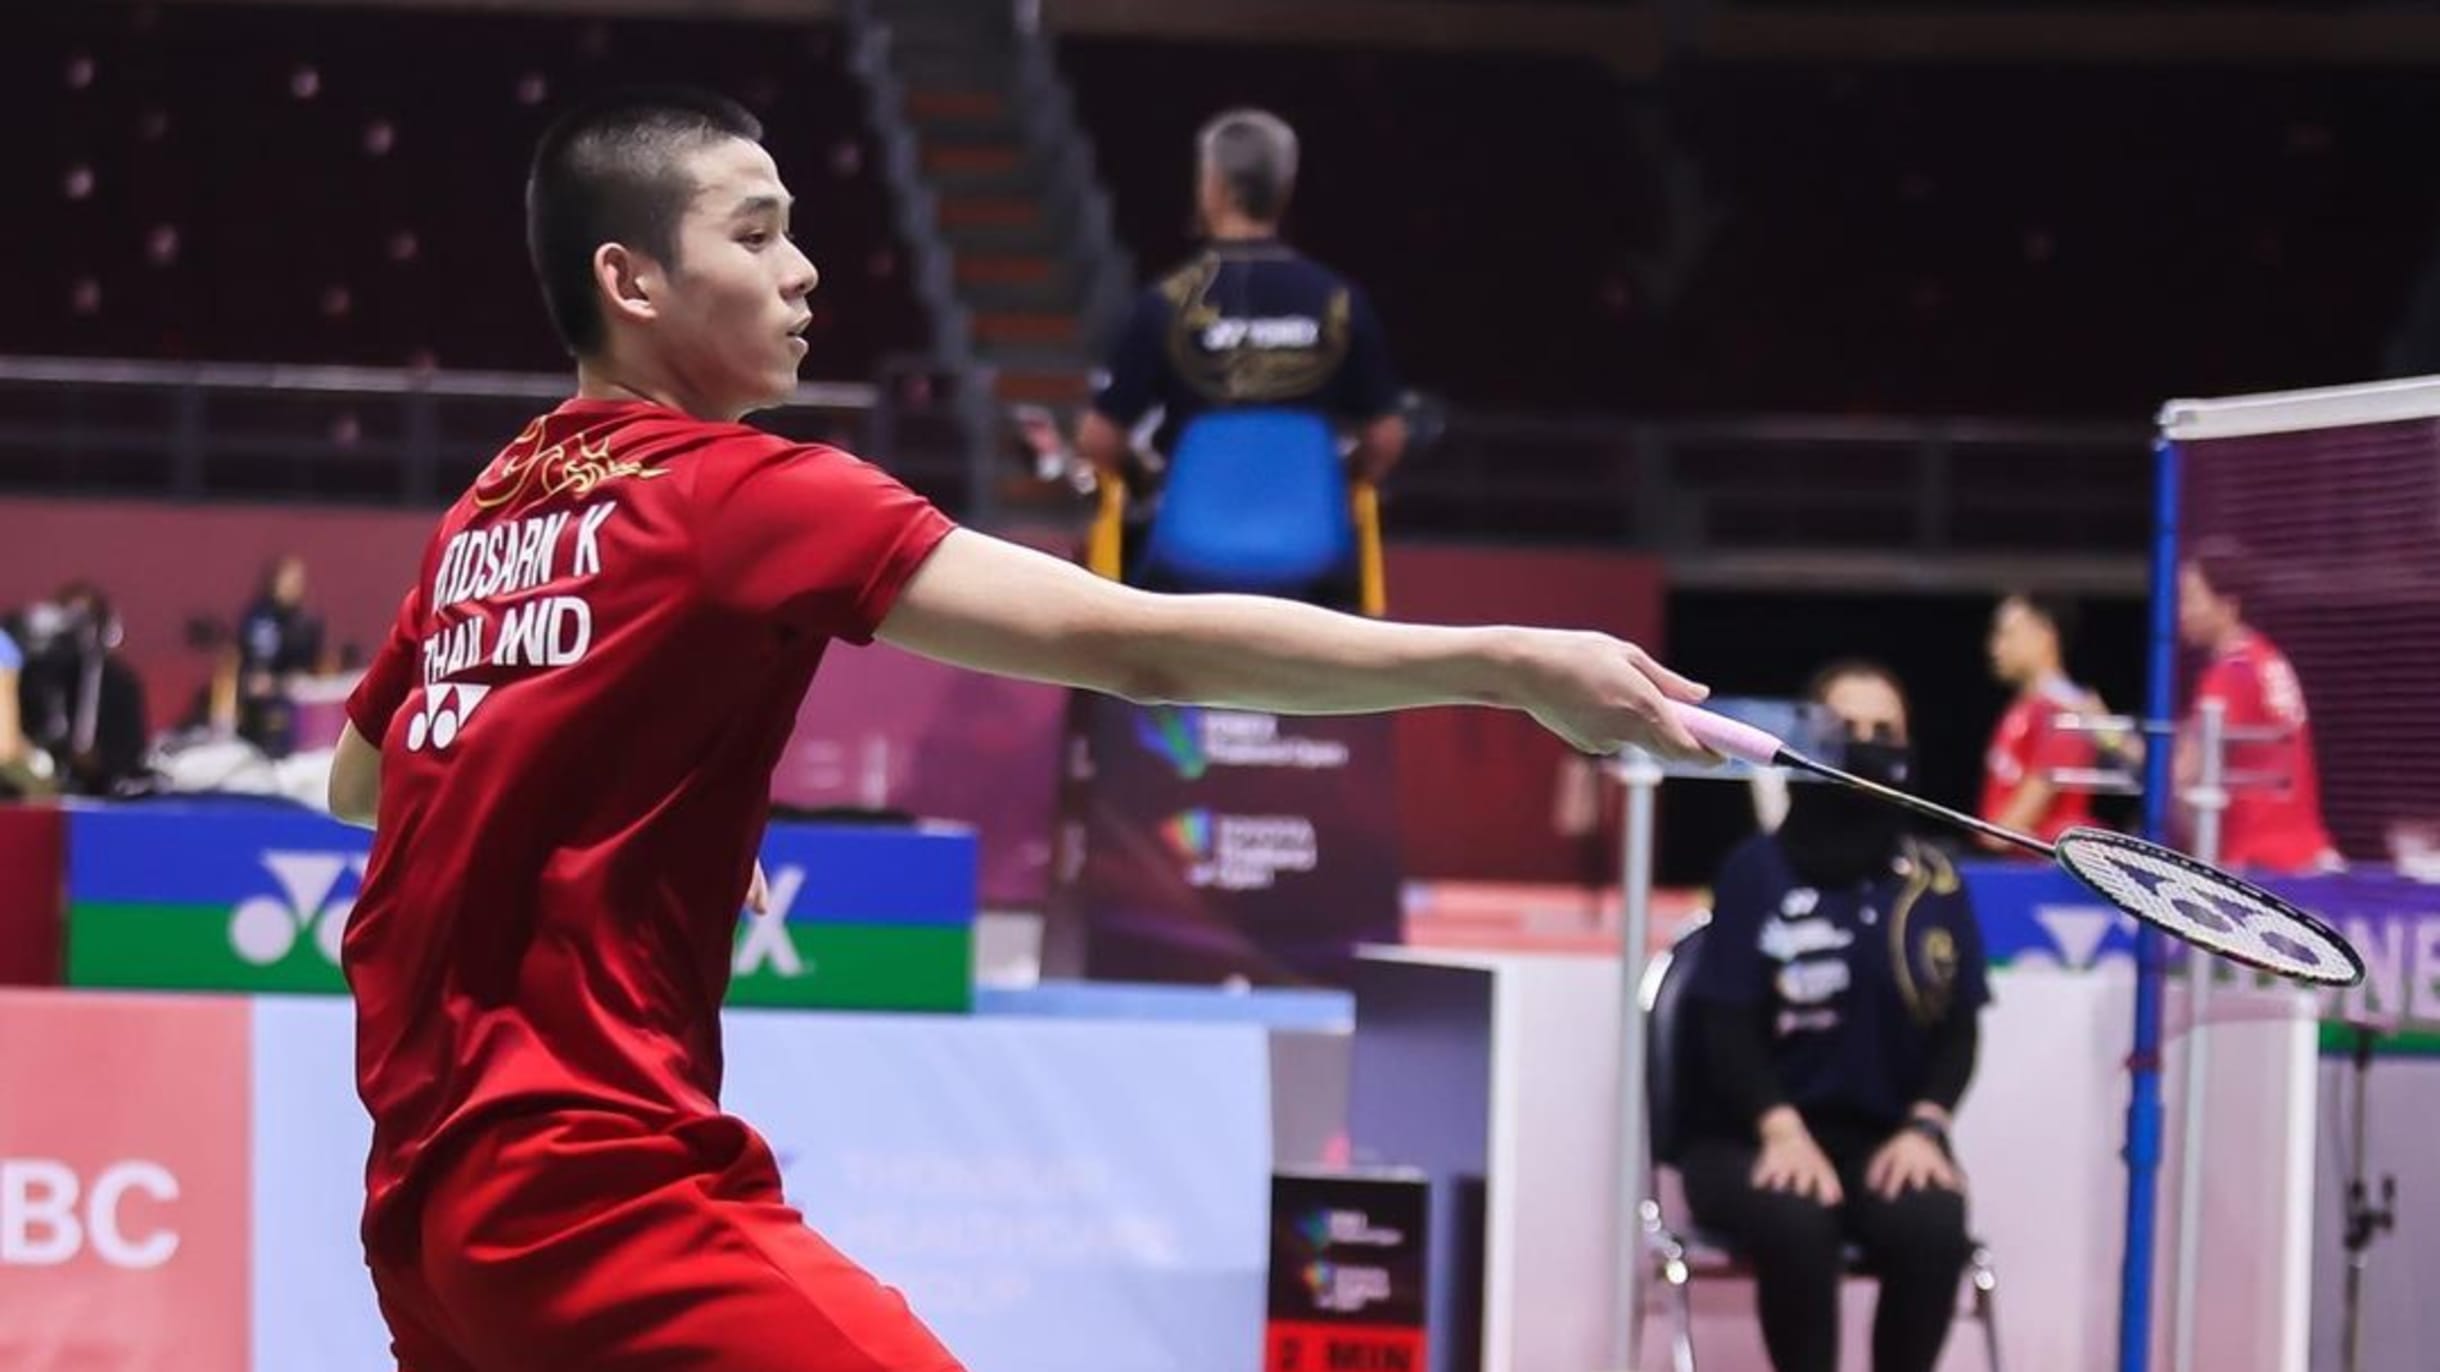 Kunlavut Vitidsarn Things to know about Thailands badminton sensation